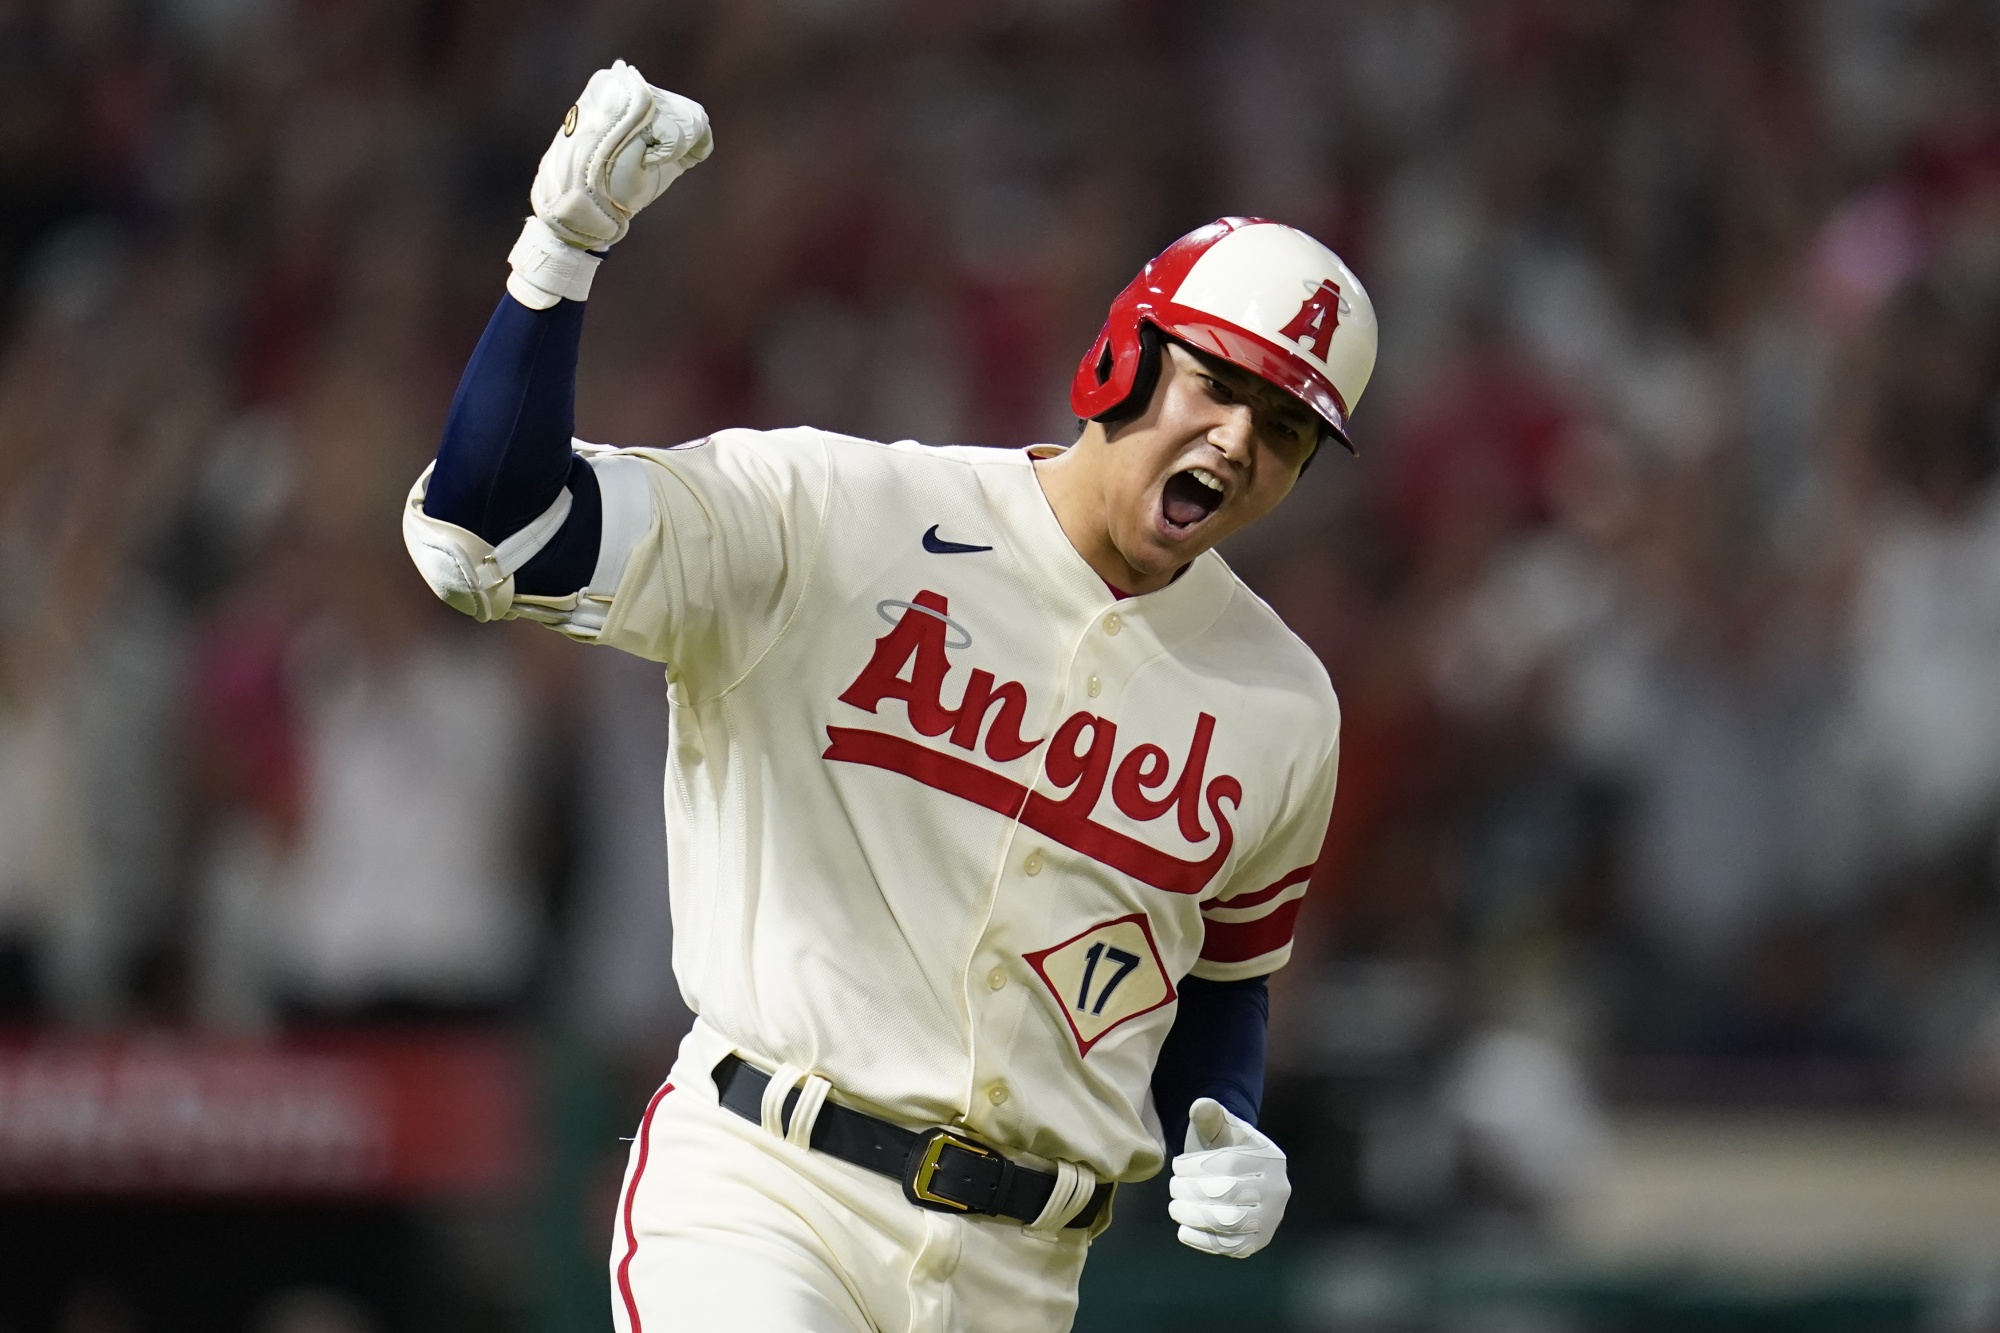 Ohtani becomes first Japanese player to have top-selling MLB jersey